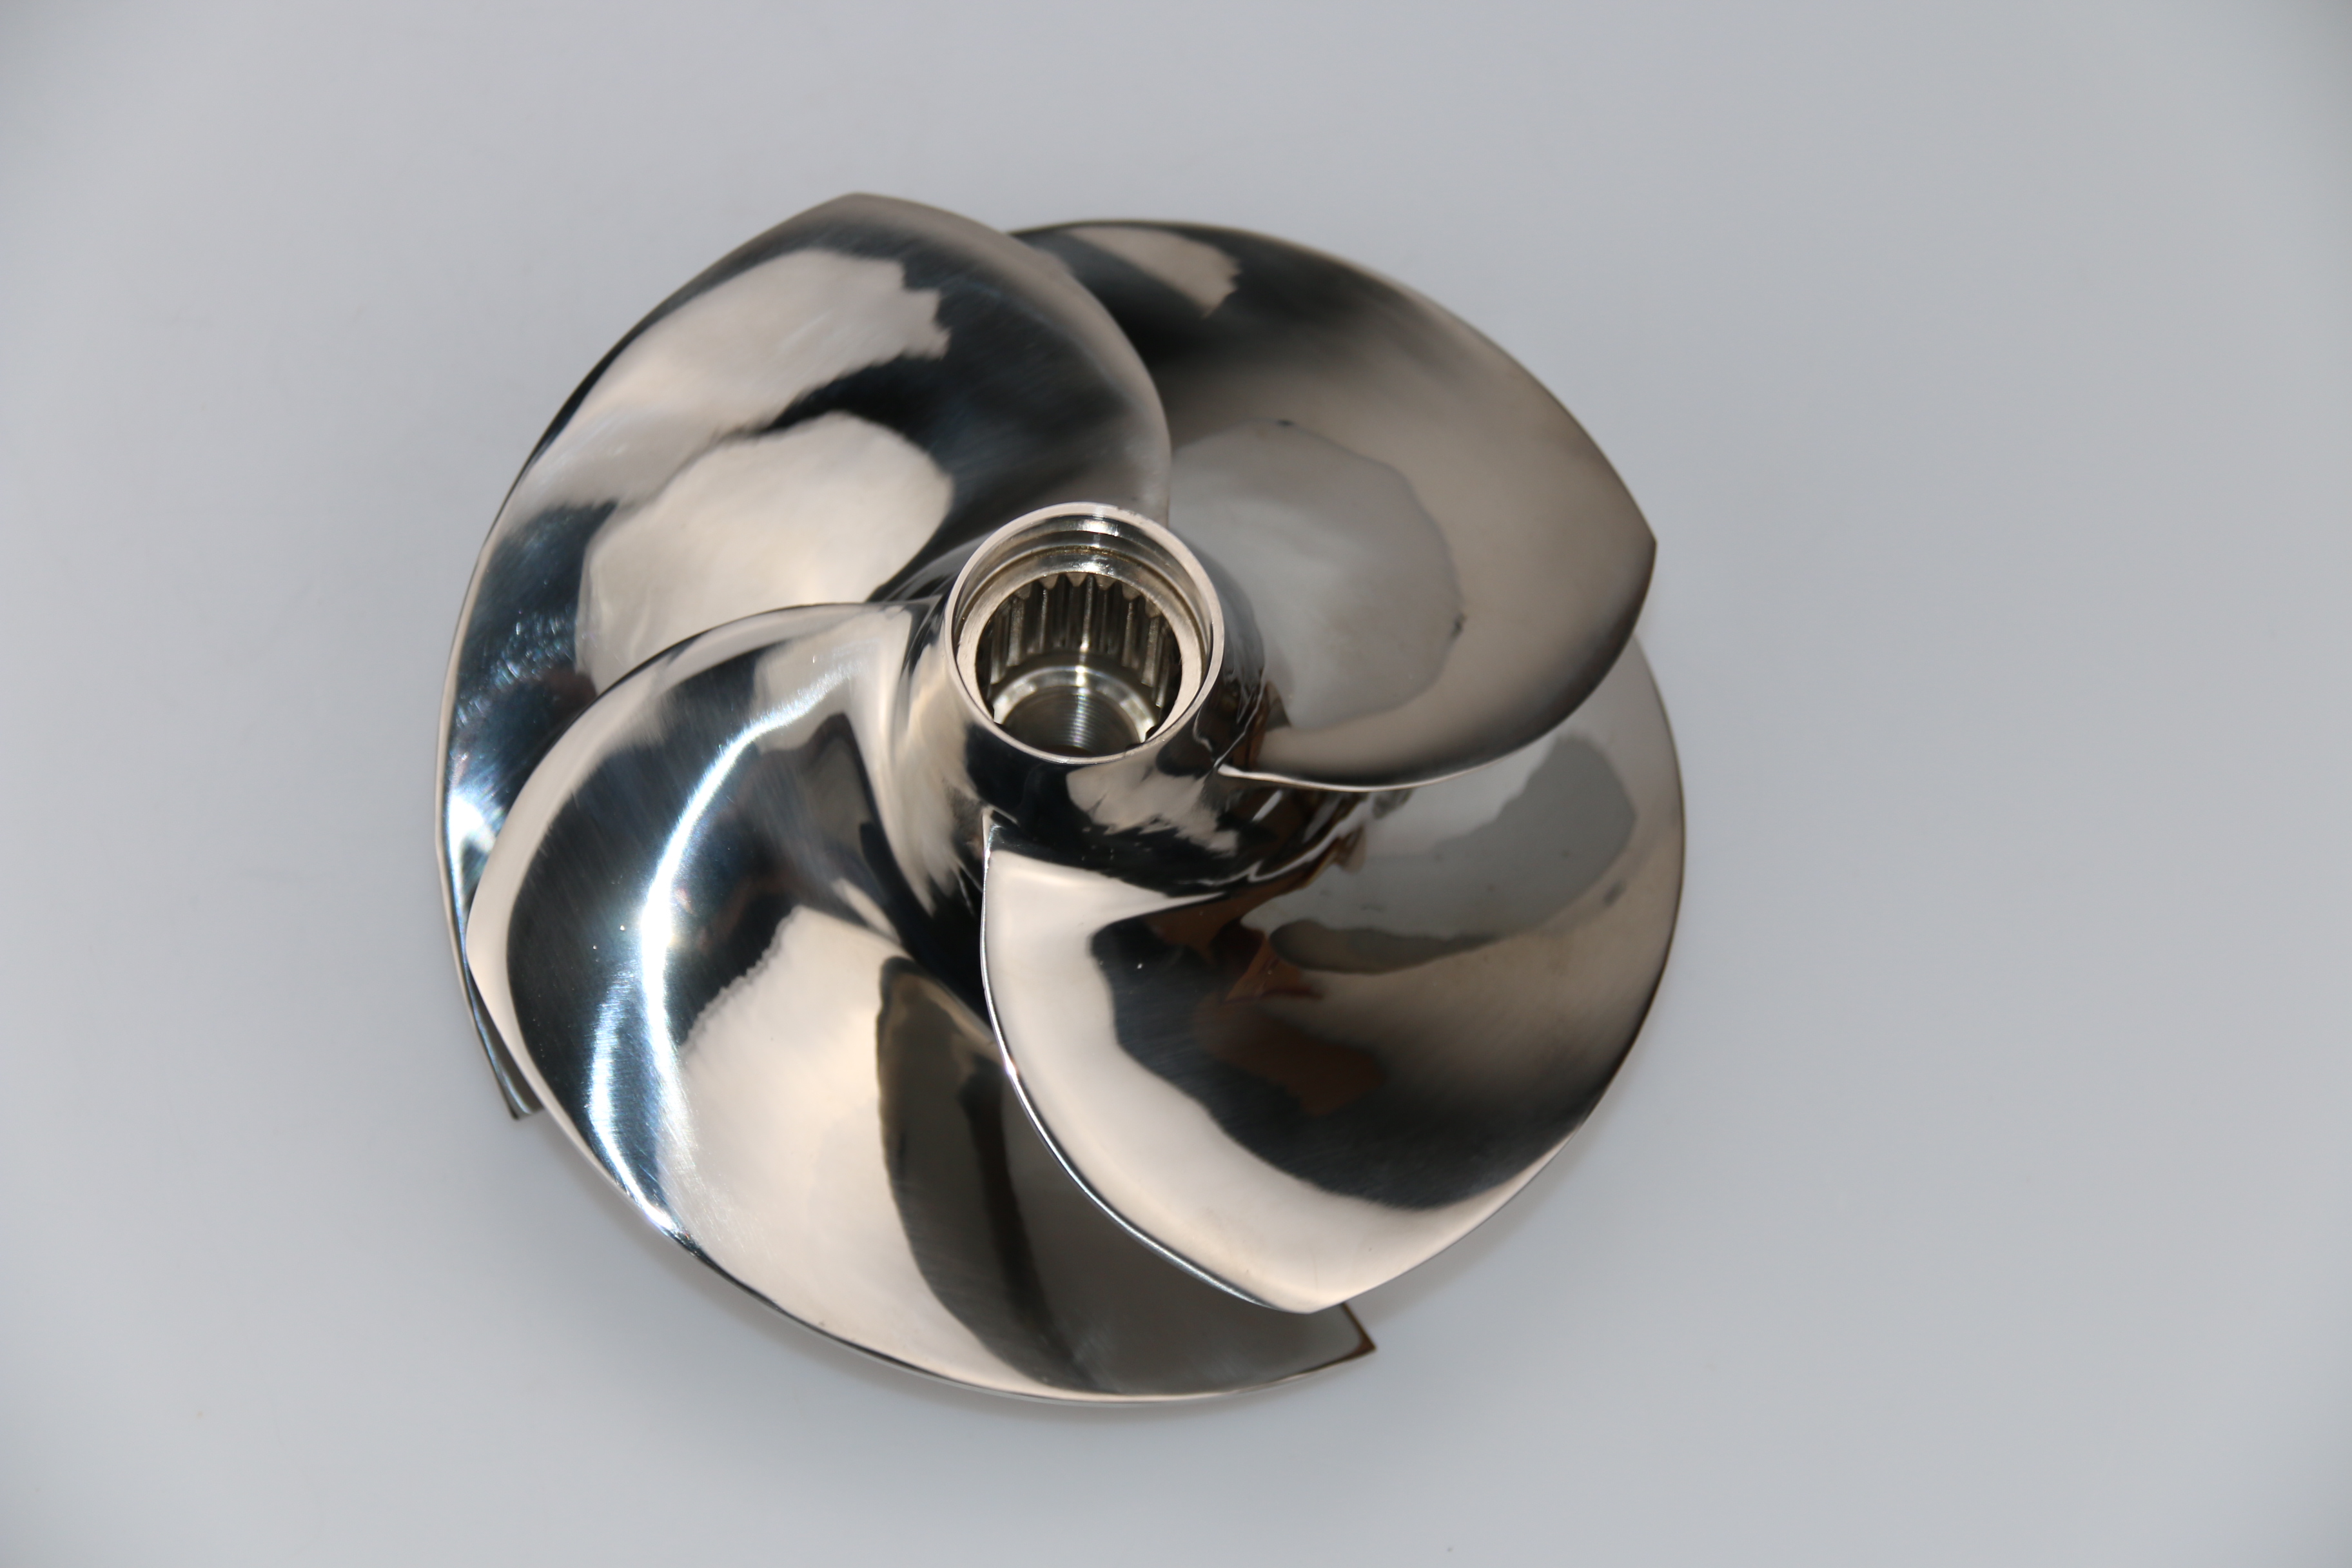 Jet boat Impeller Diameter 155.5mm Matched With Seadoo 2007-2009 230 Challenger /Challenger SE2 X 155HP and 2007 Islandia SE2 X 155HP and 2004-2009 SPEEDSTER200 2X 155HP SR-CD-11/19 